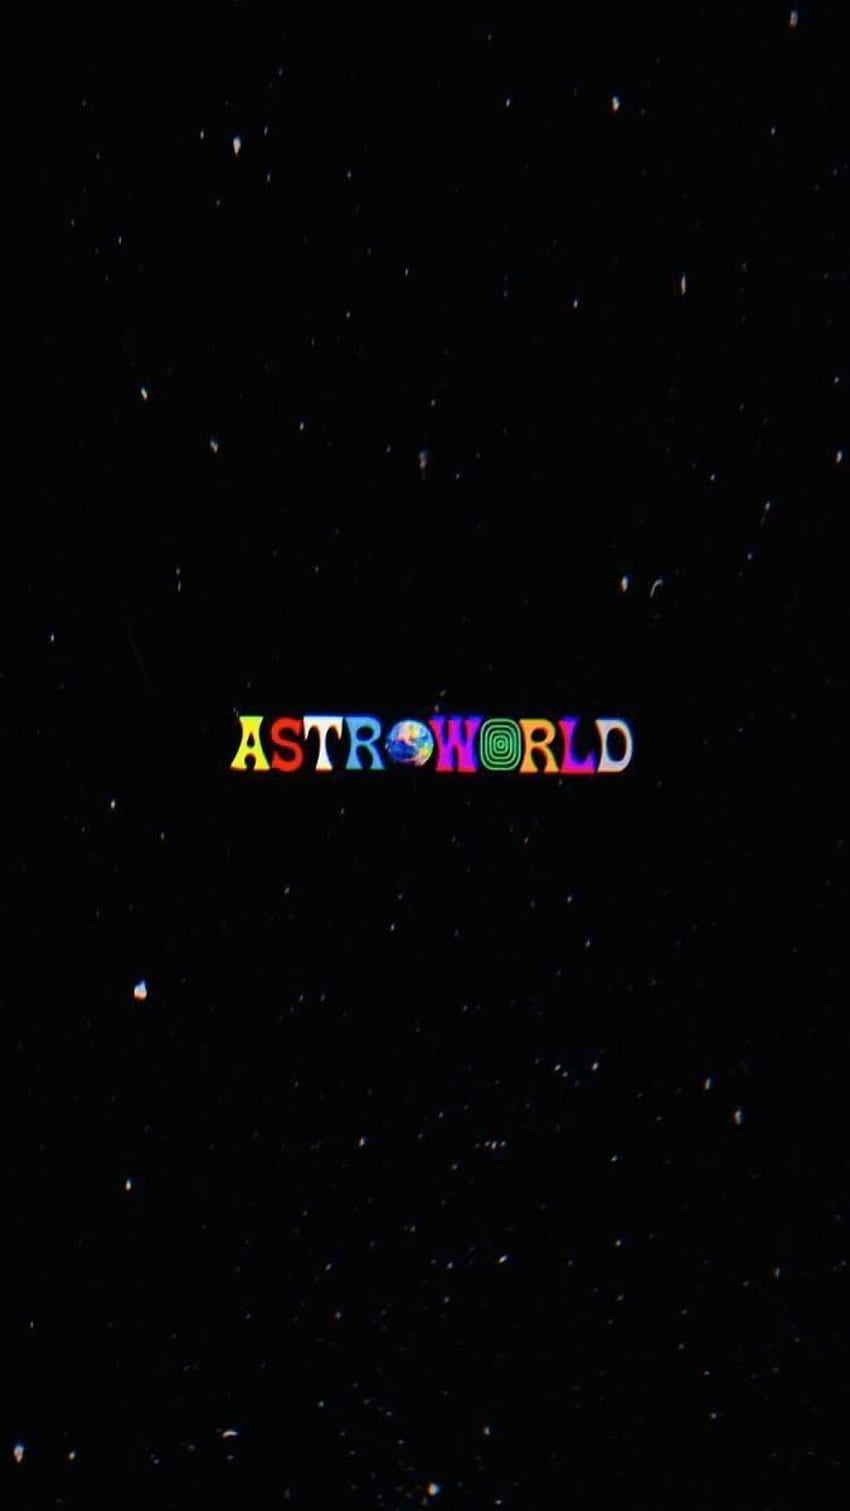 Vintage scott in 2020. Edgy, Aesthetic iphone, Retro, Cool Astroworld HD phone wallpaper